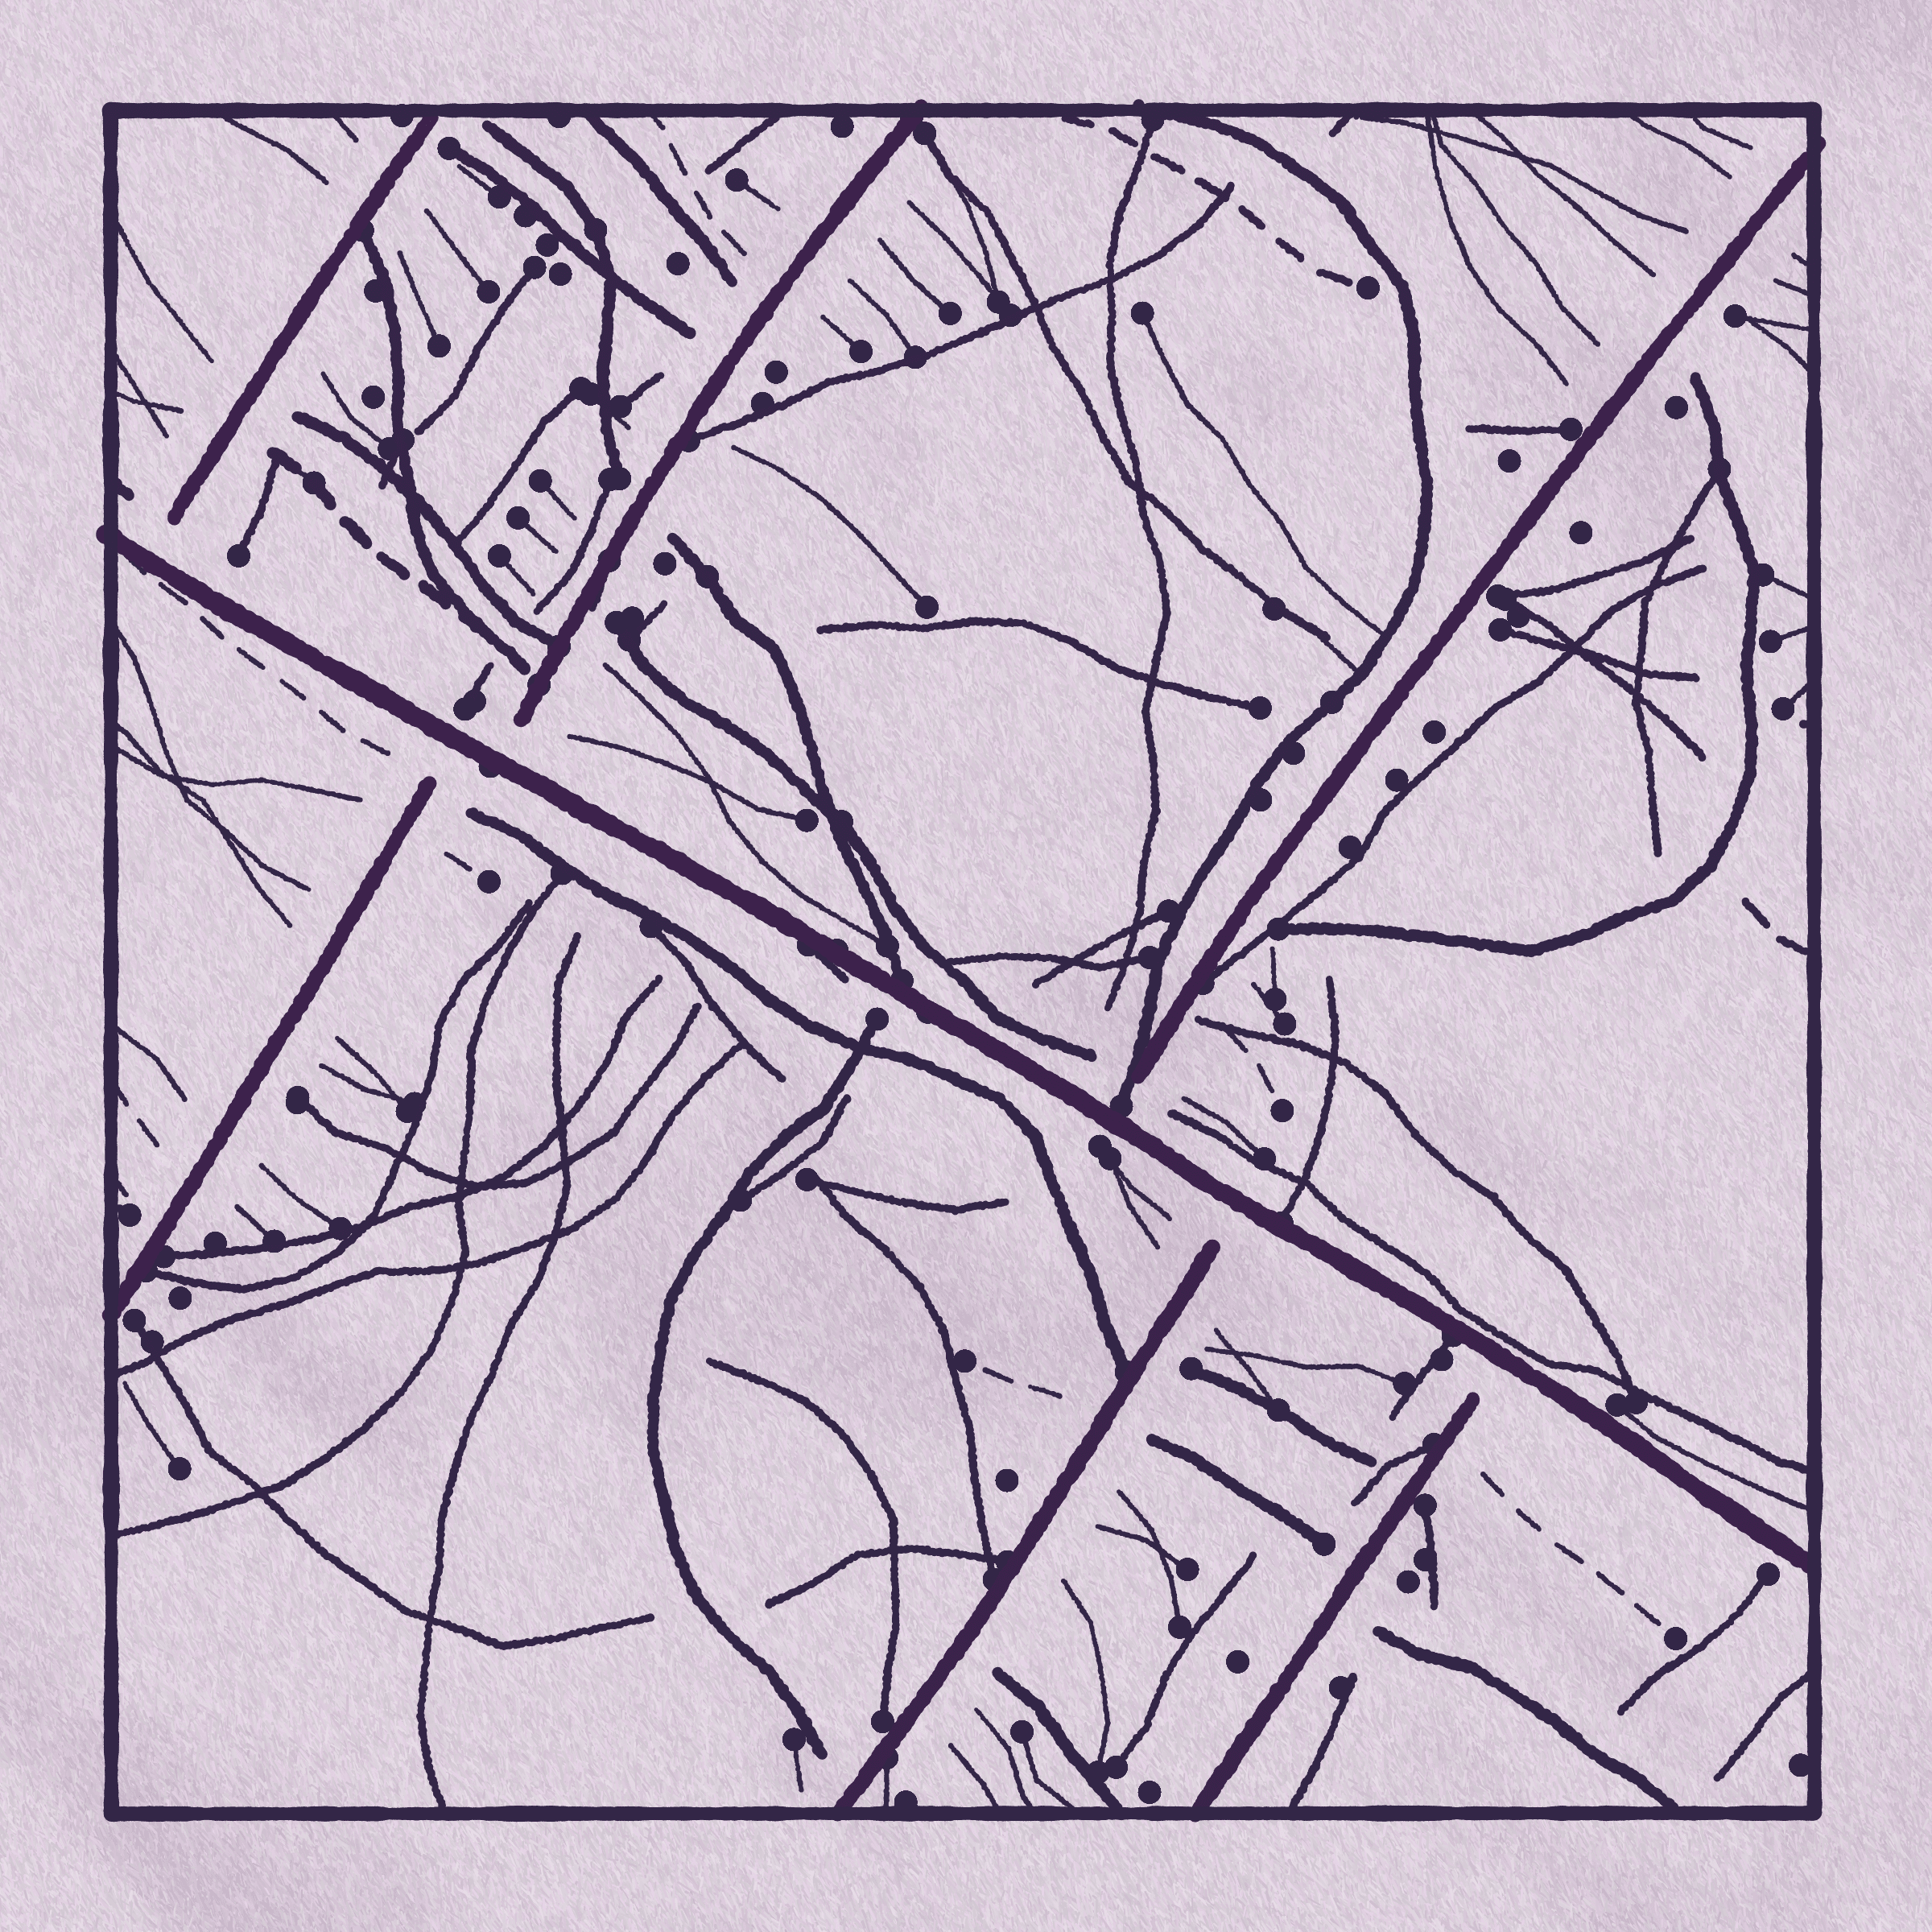 Maps of Nothing #479